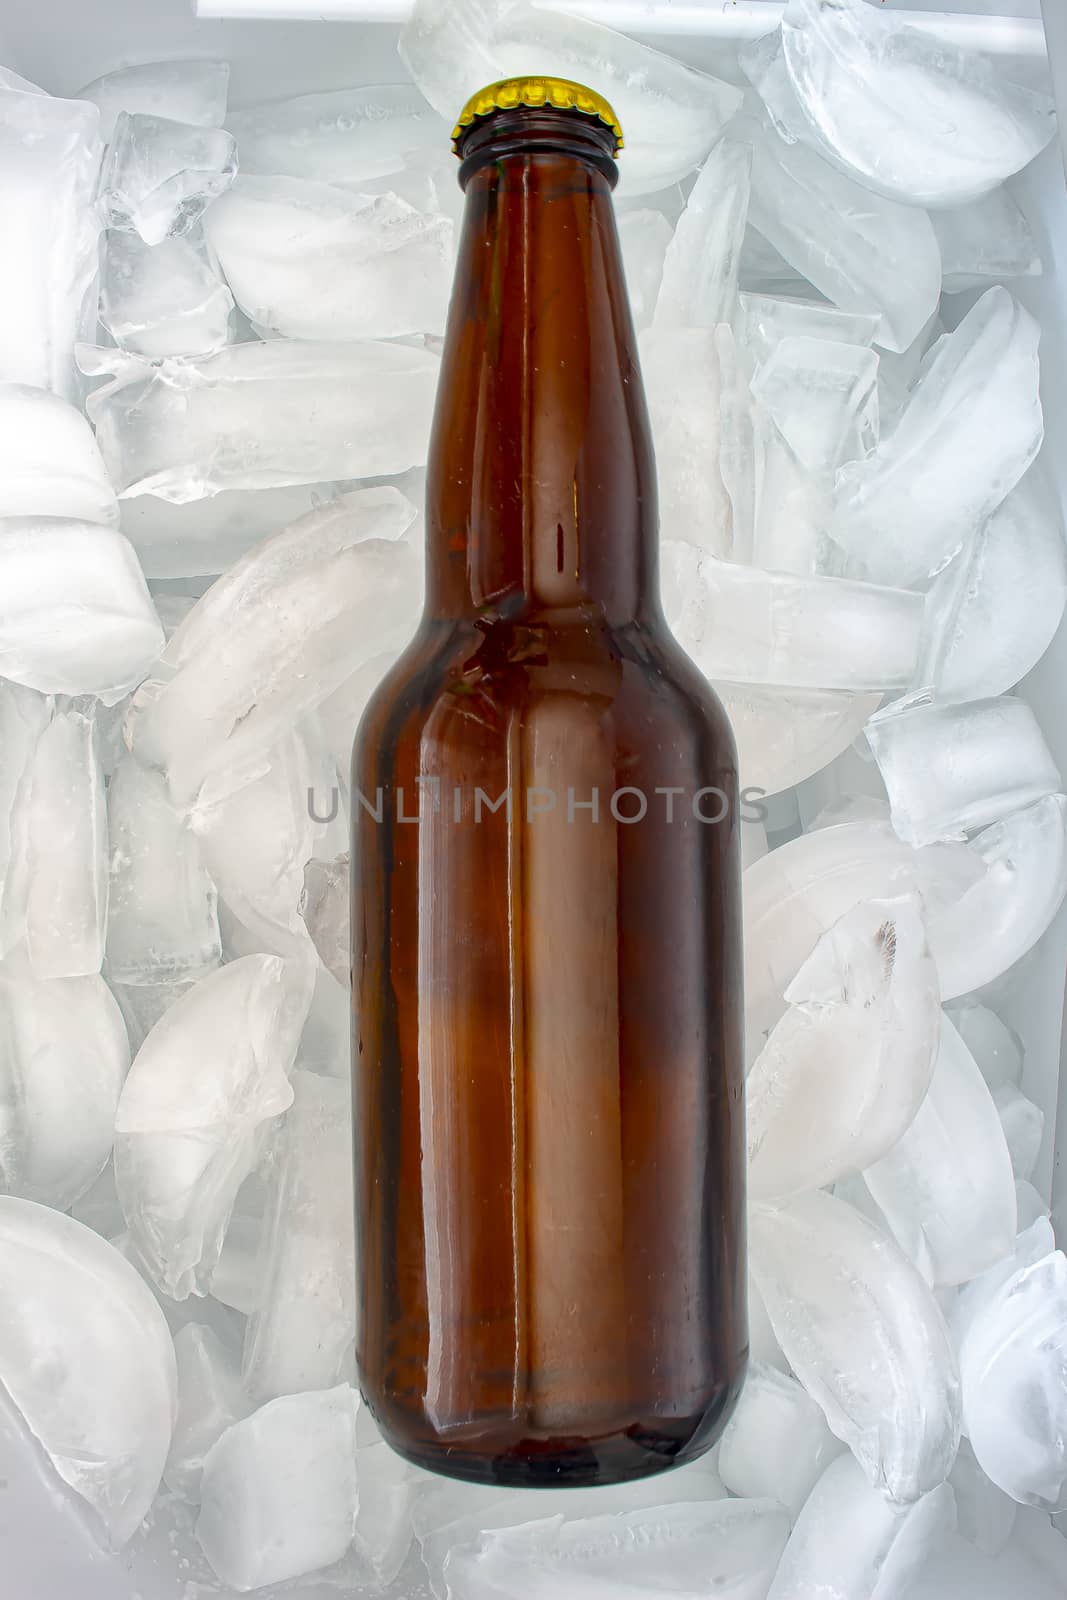 A generic brown beer bottle on ice